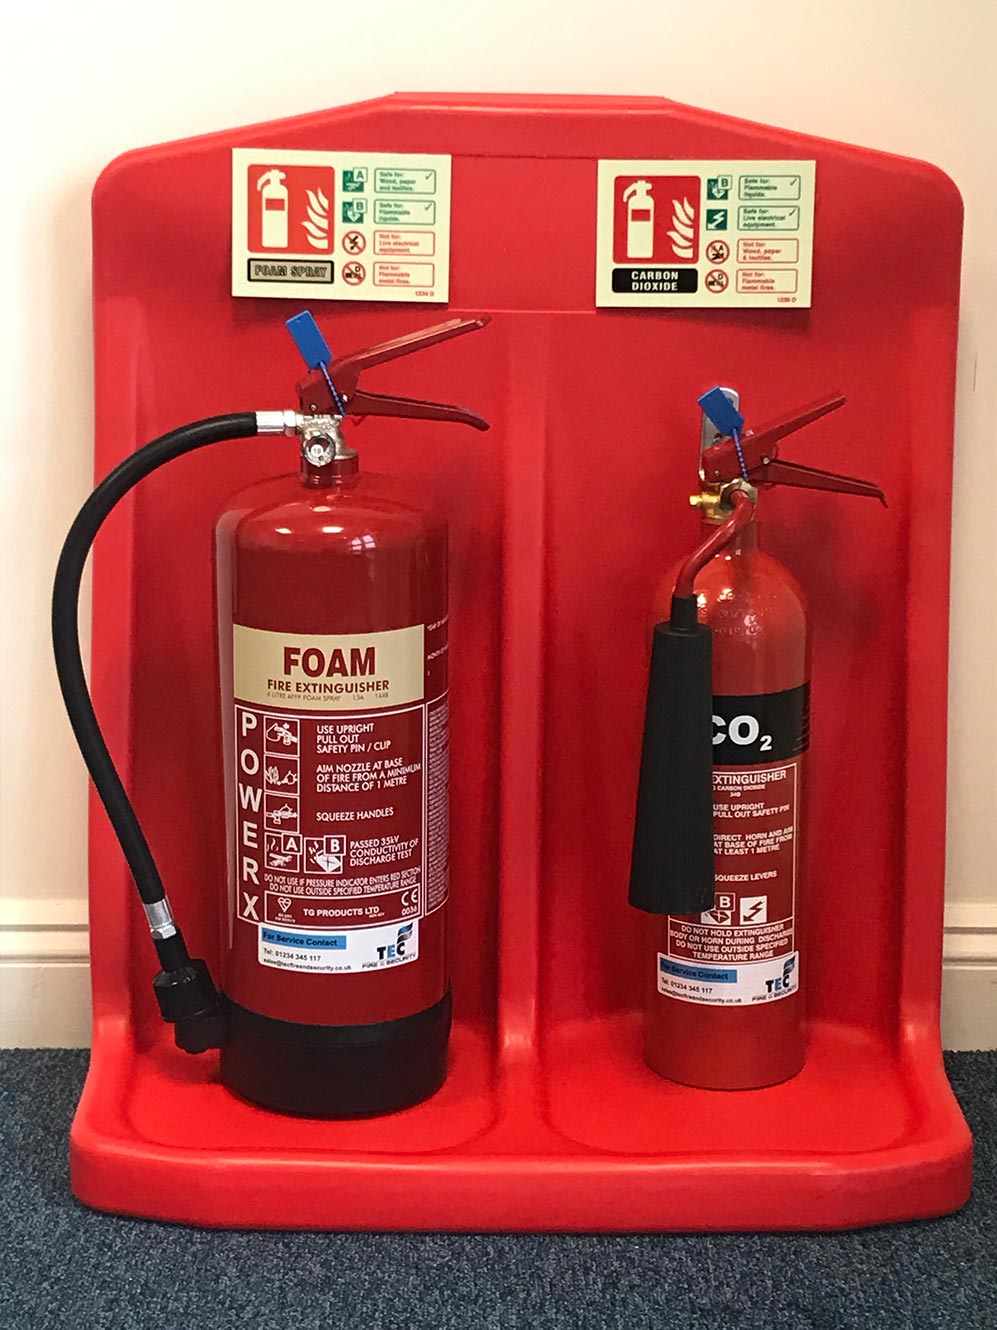 Foam and CO2 fire extinguishers on stand with signage